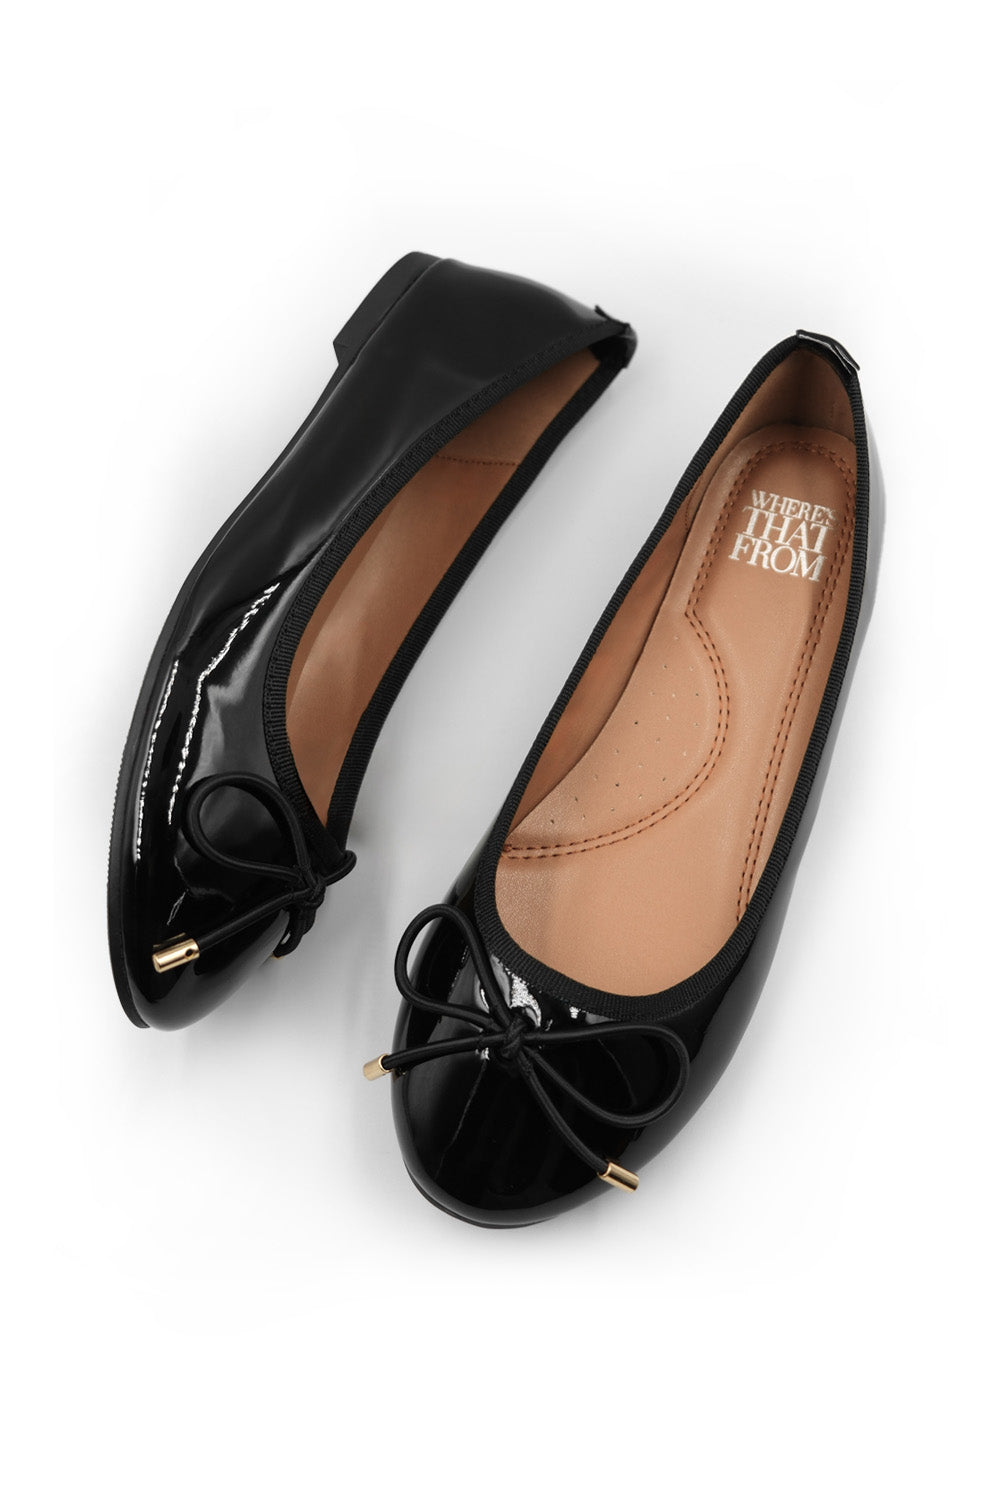 TRUTH KIDS  SLIP ON FLAT BALLERINA IN BLACK PATENT FAUX LEATHER